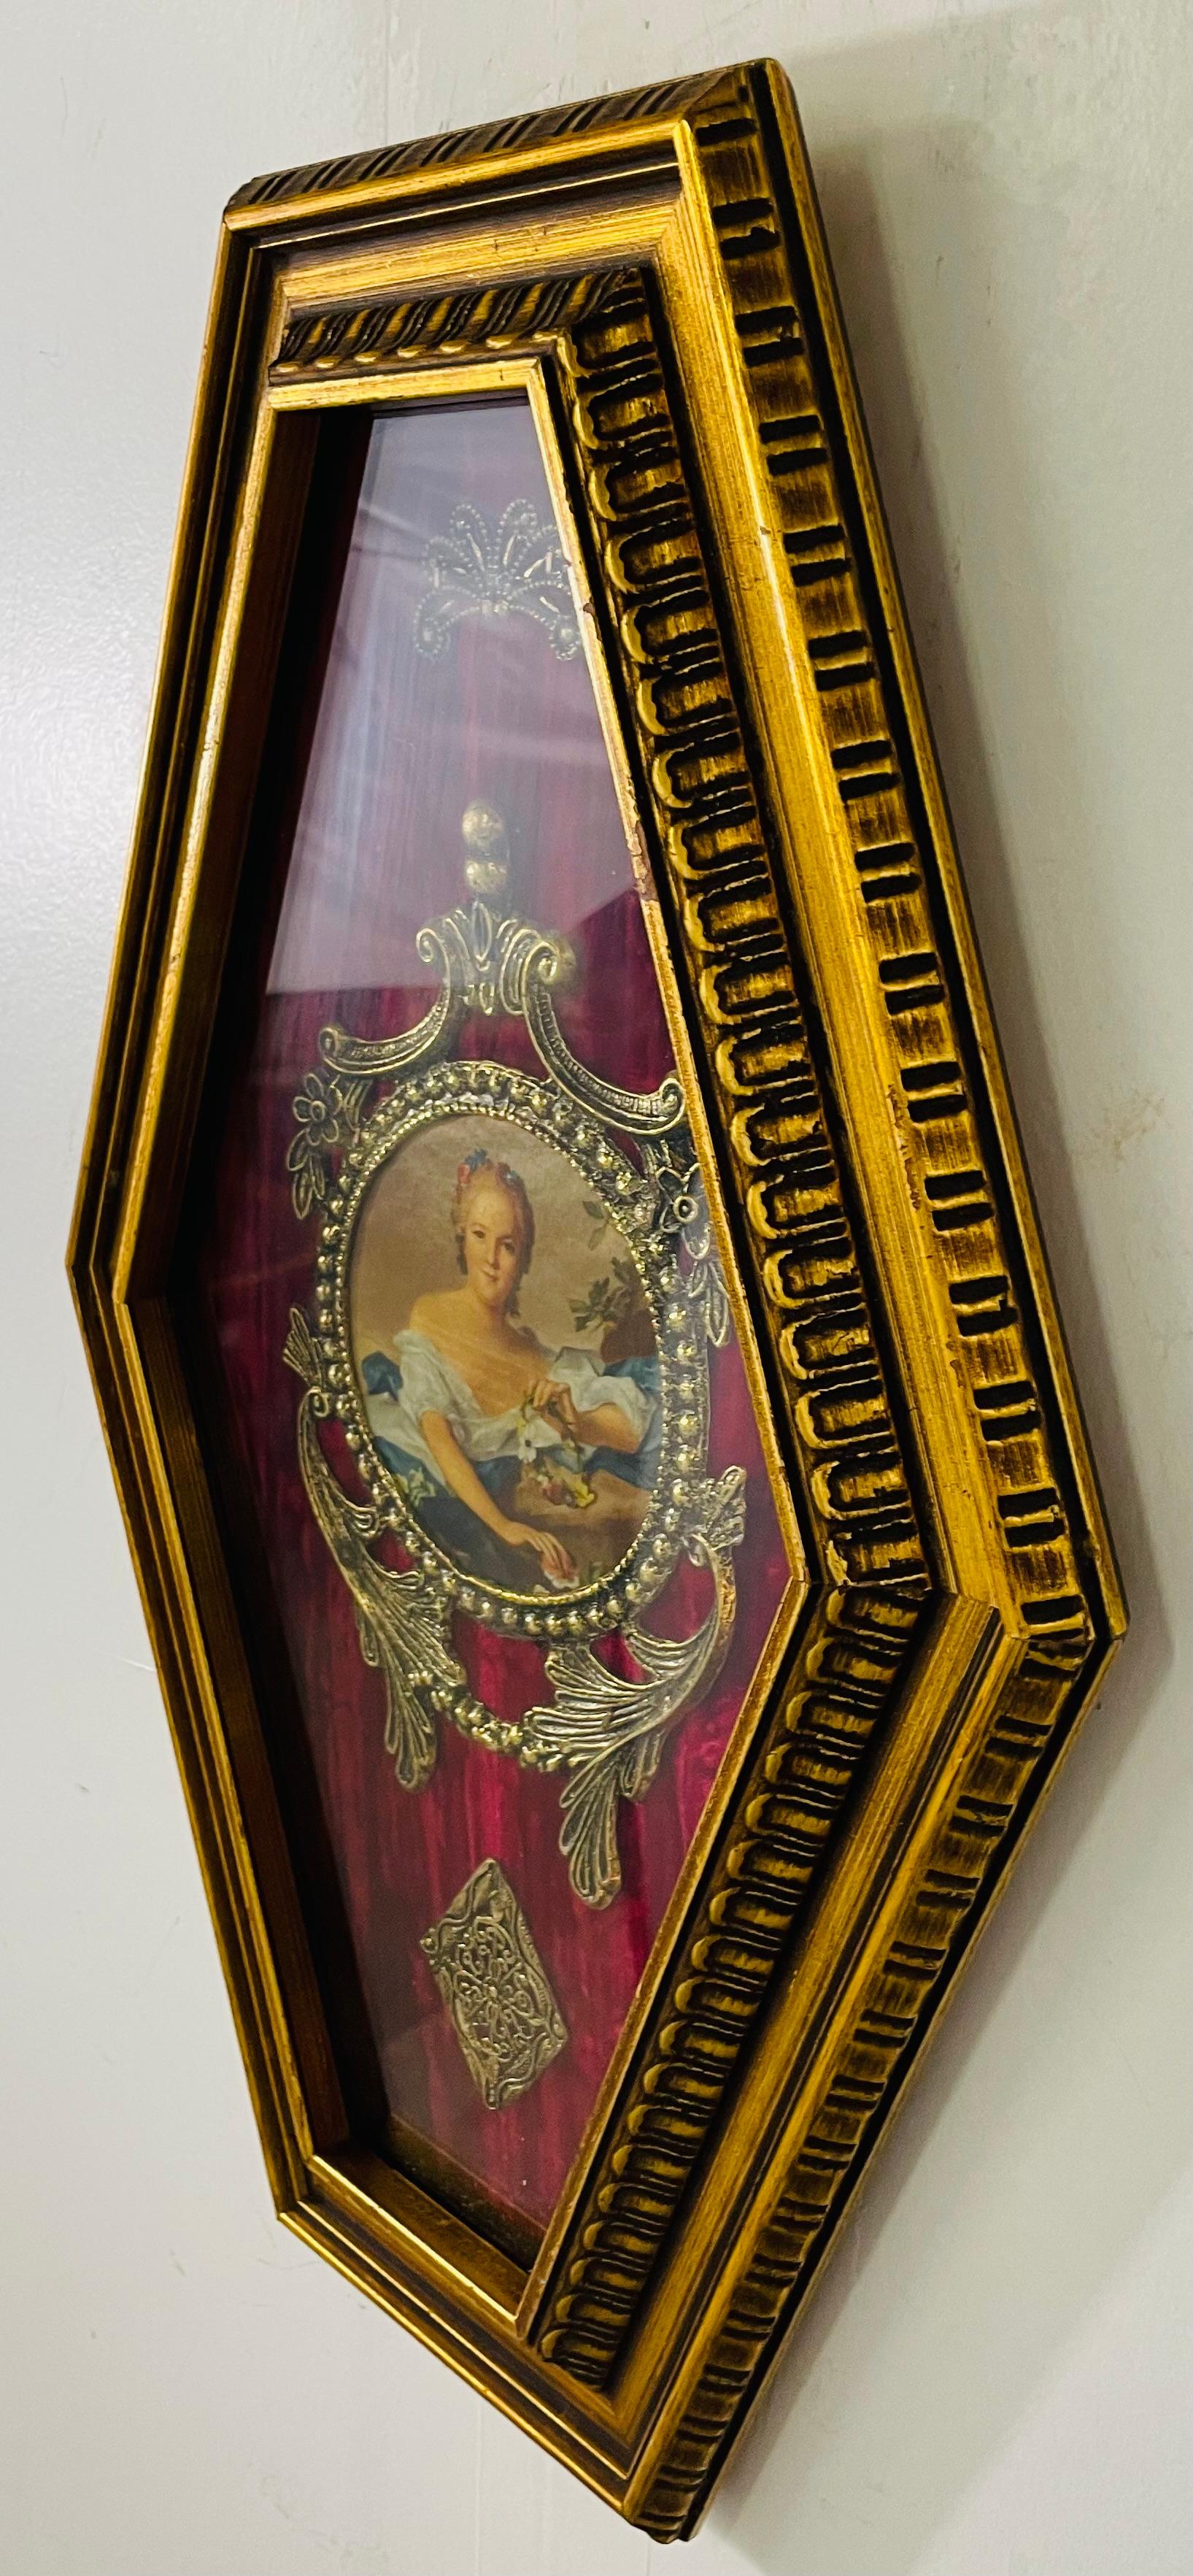 An antique French School round hand painted portrait of a lady on canvas presented in a very elegant plaque with red velvet background. The portrait is nicely decorated with brass floral and acanthus design ornaments framing the portrait and